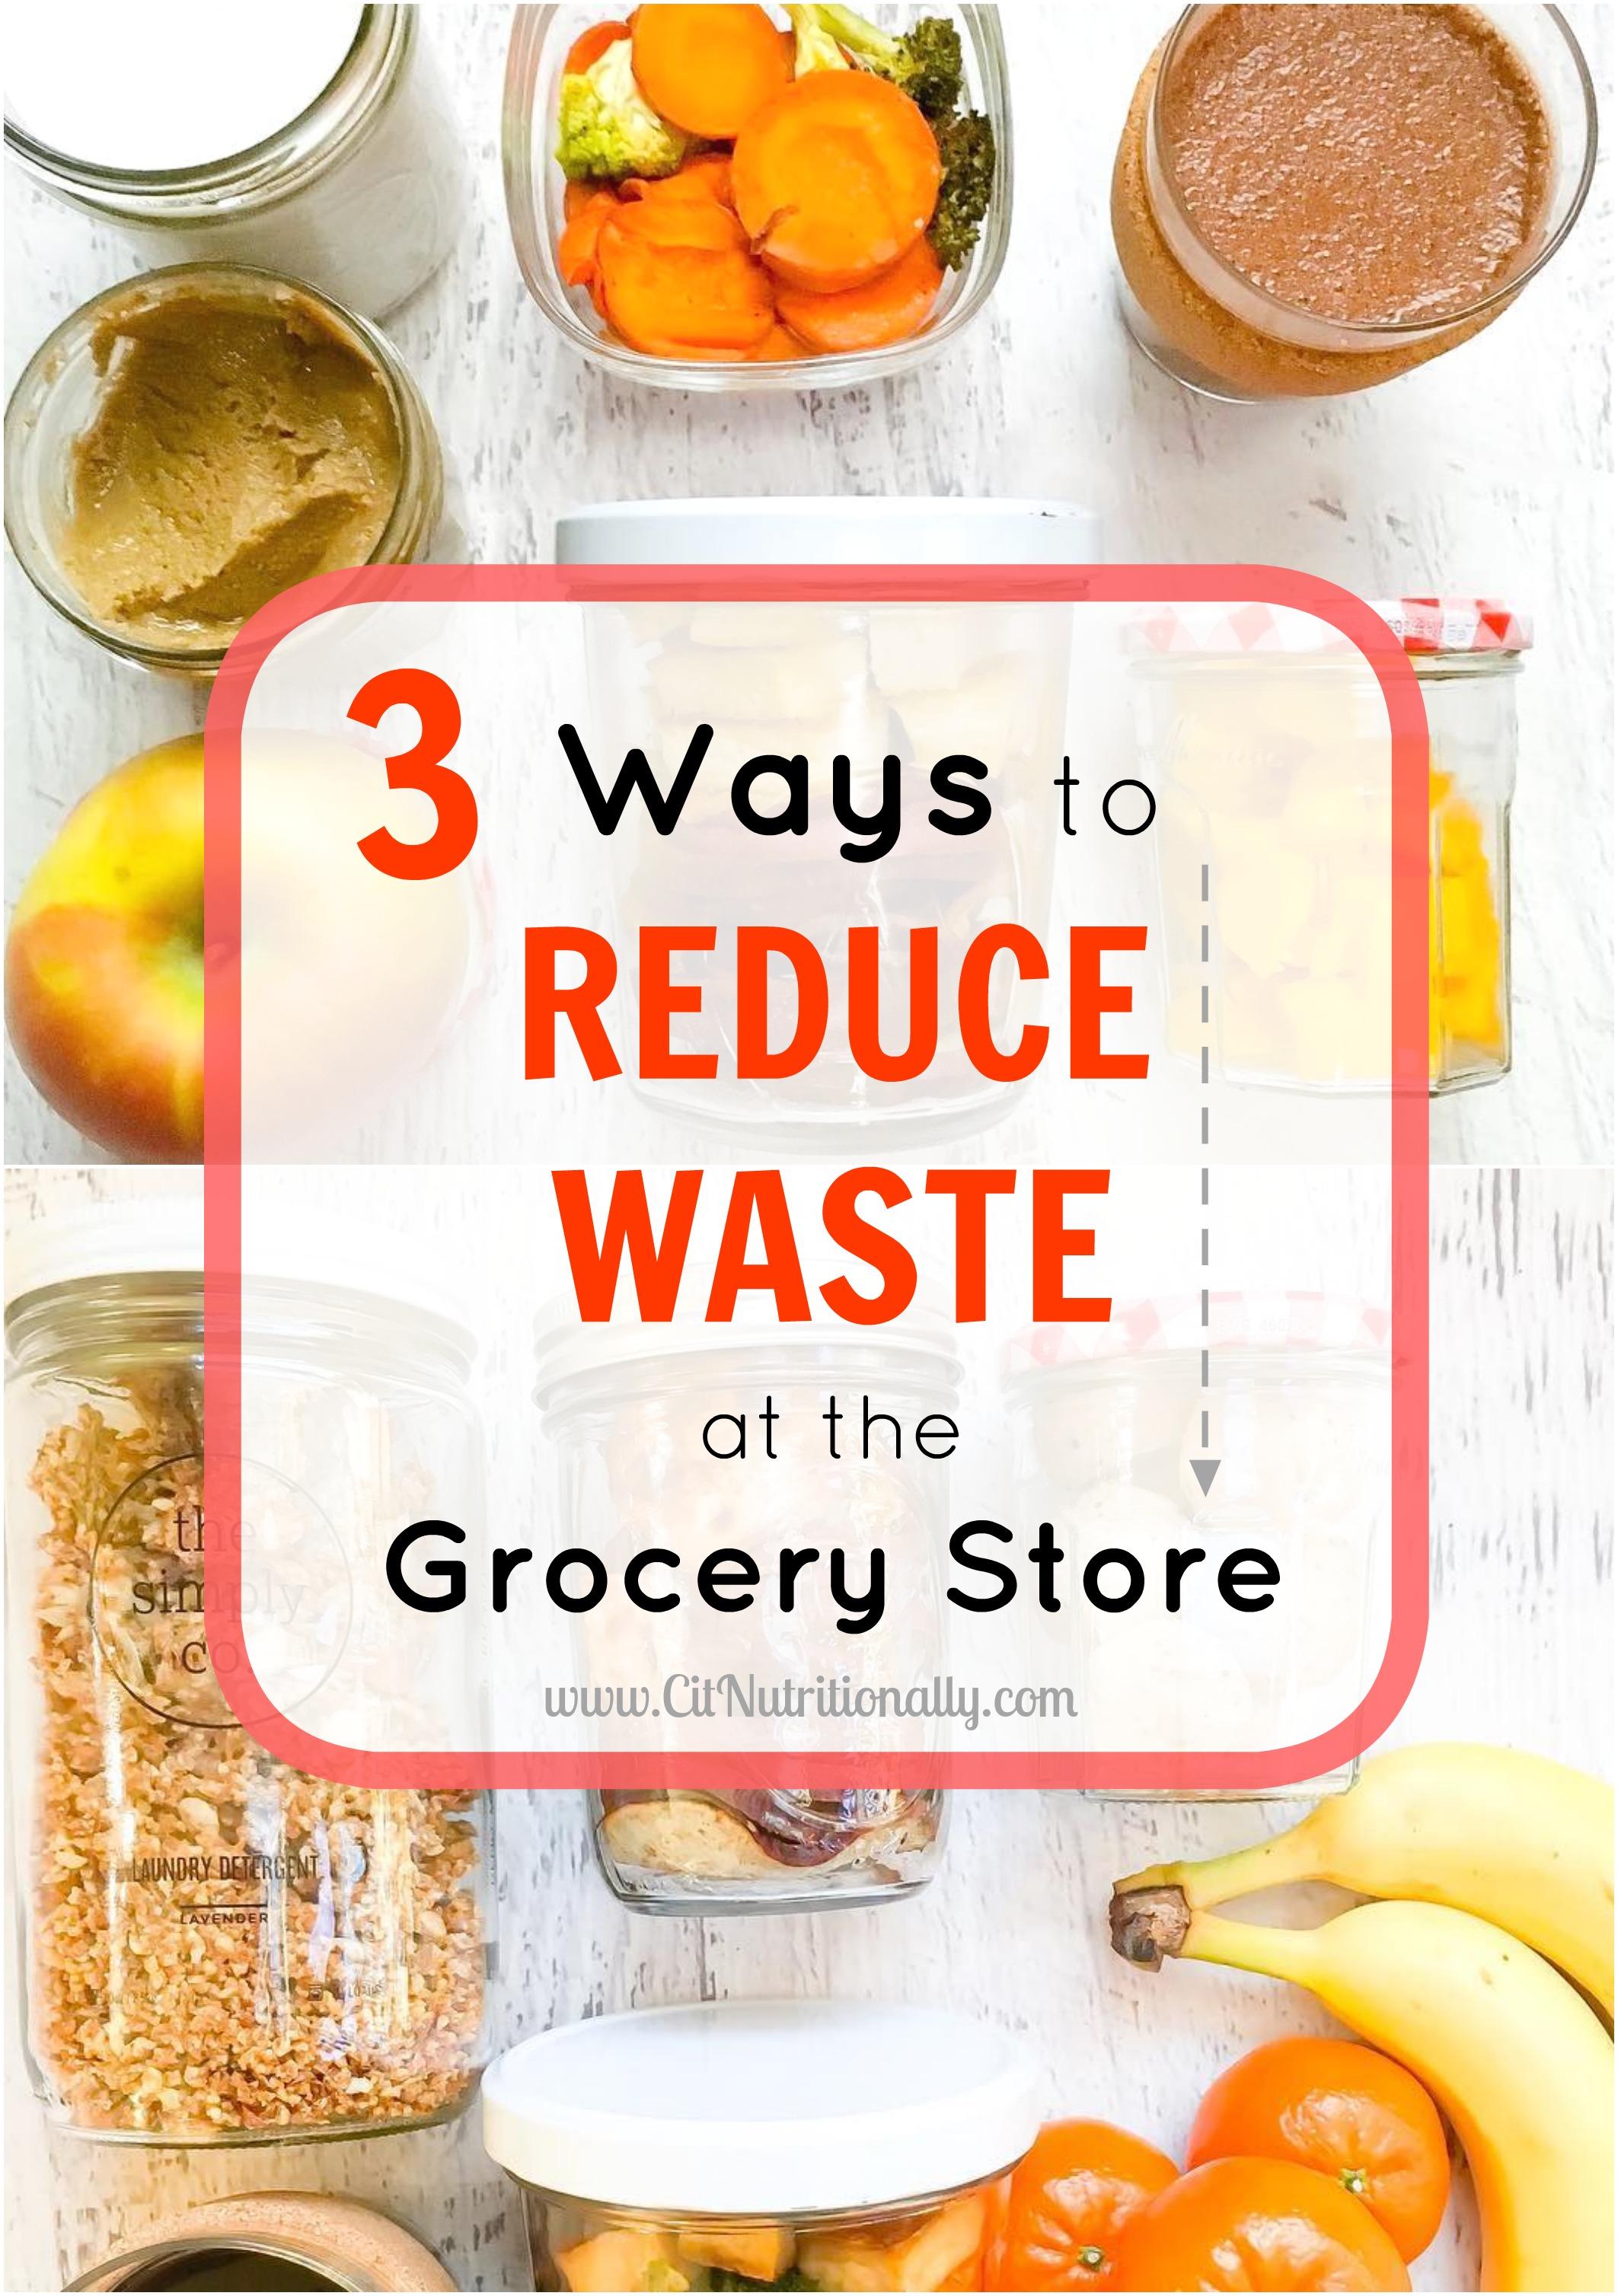 3 Ways to Reduce Waste at the Grocery Store | by Abby K. Cannon for CitNutritionally.com